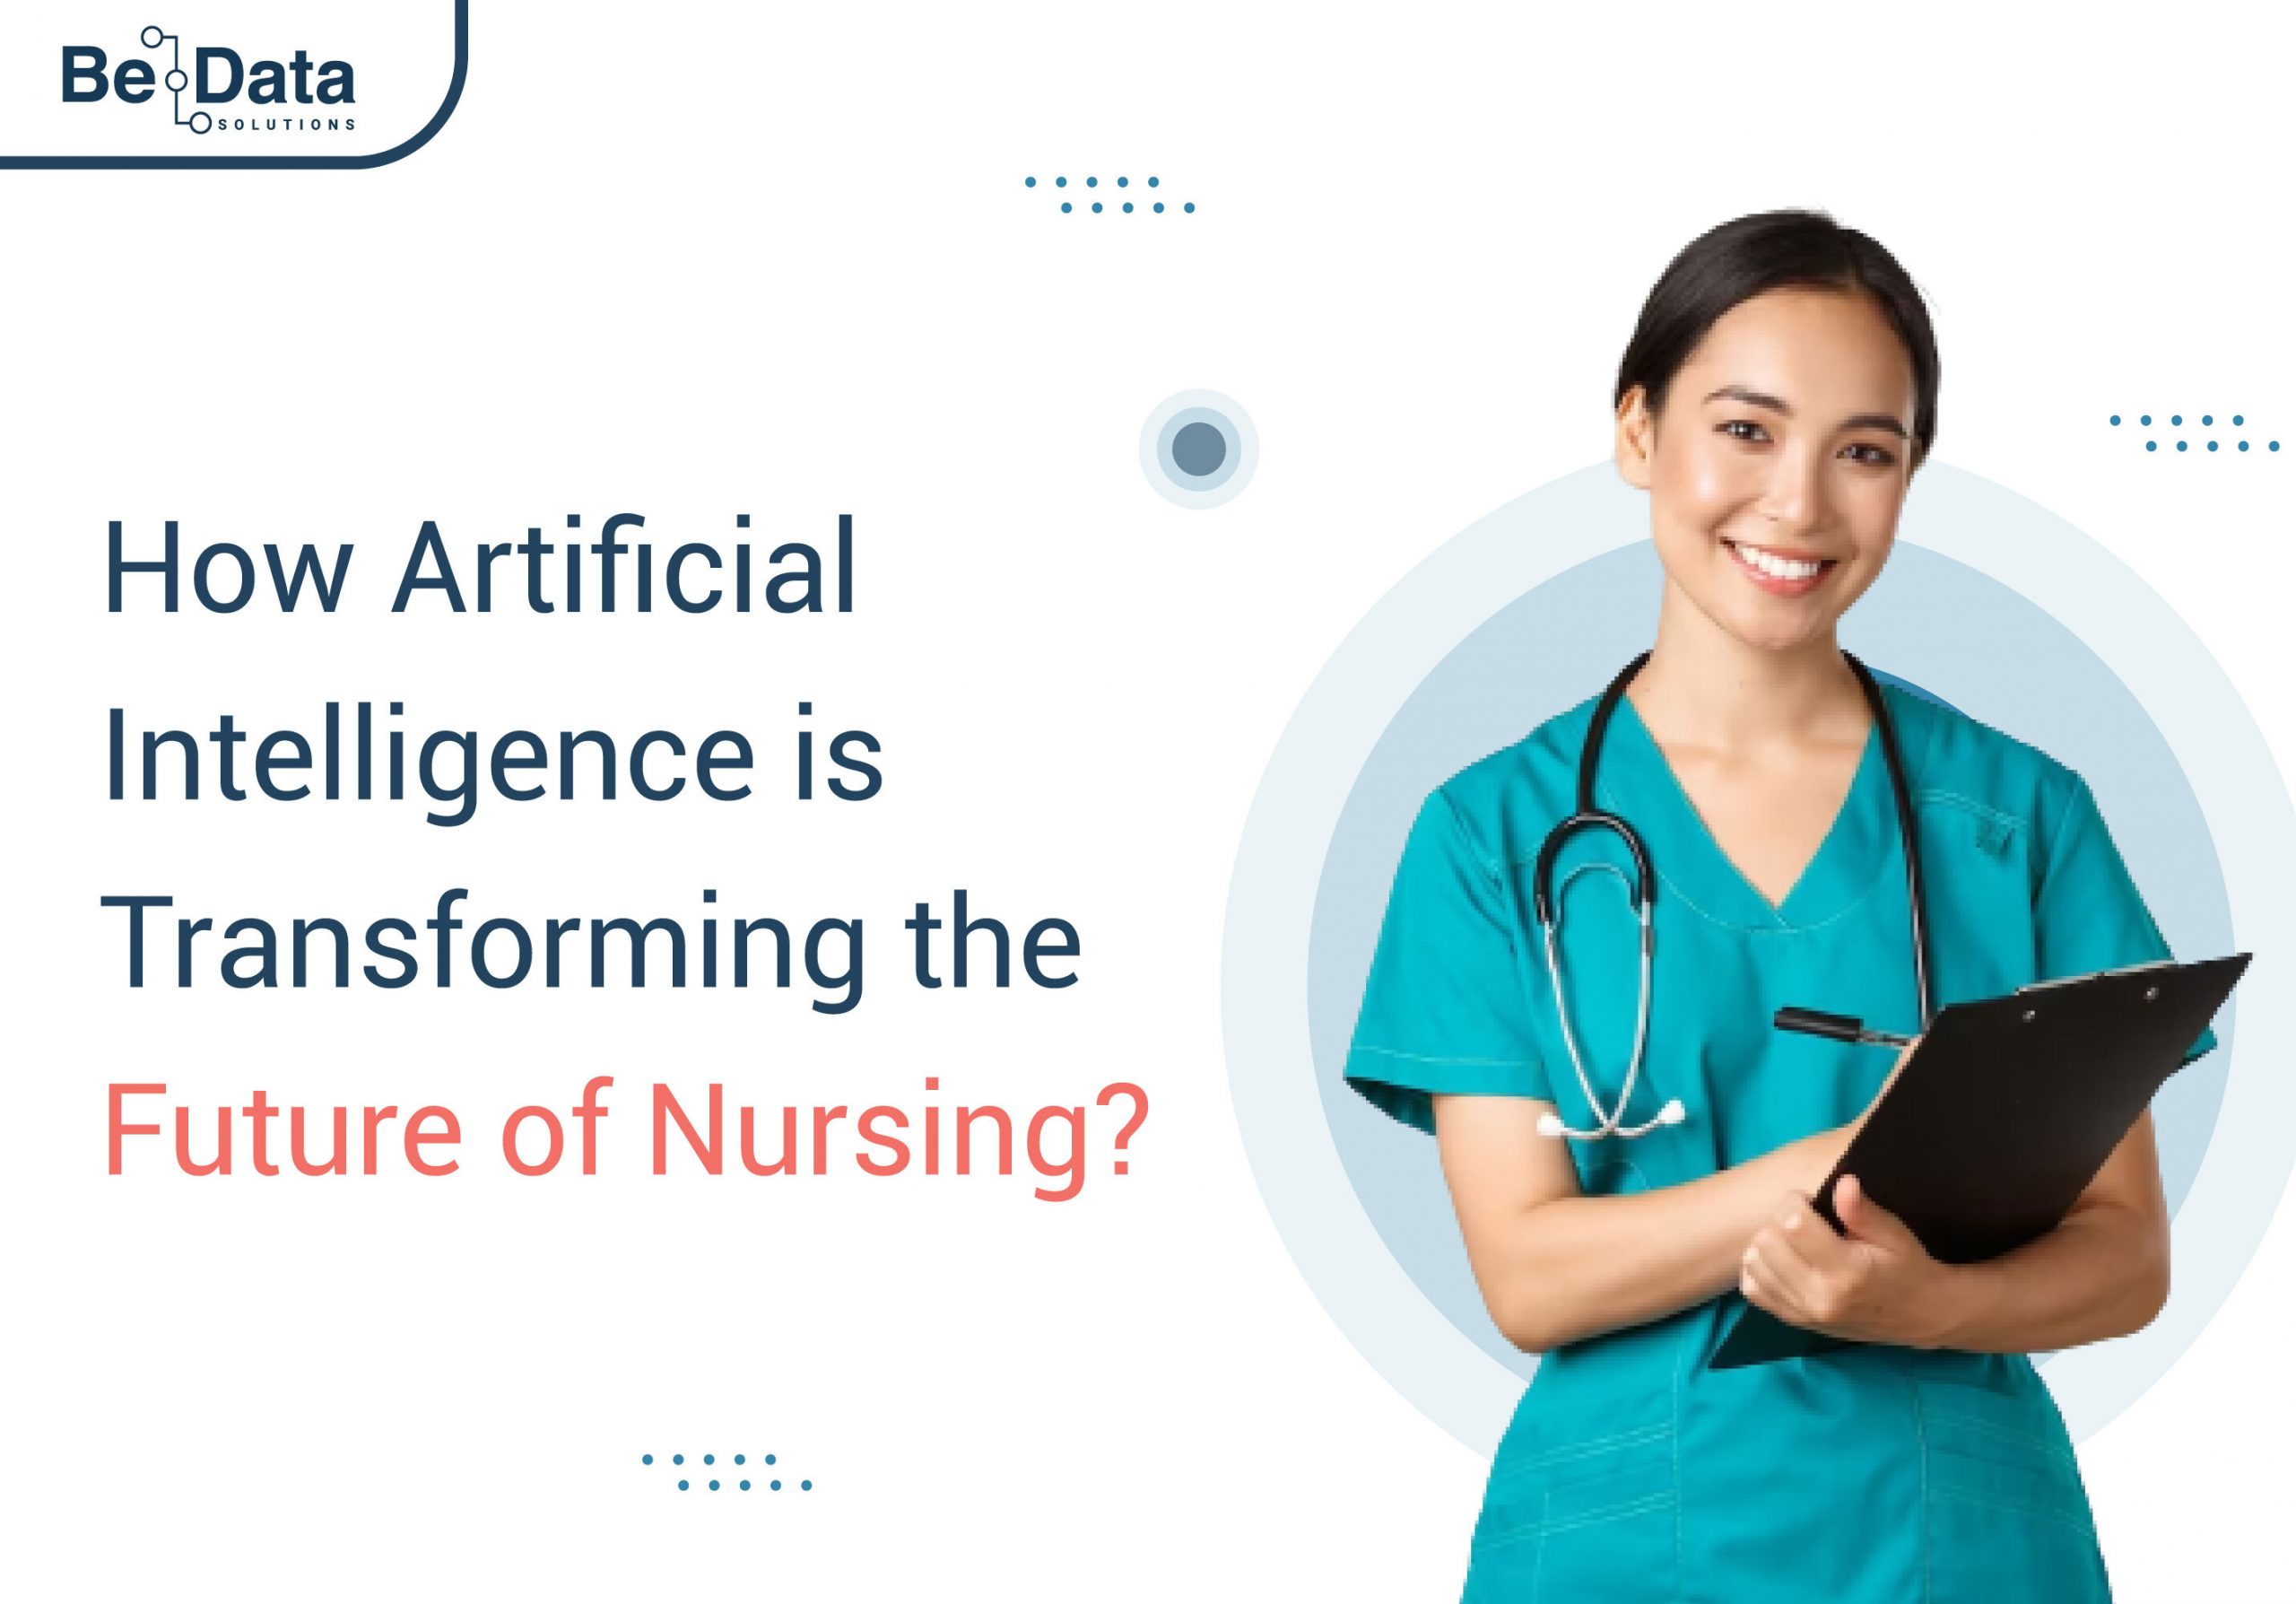 How AI is Transforming the Future of Nursing?